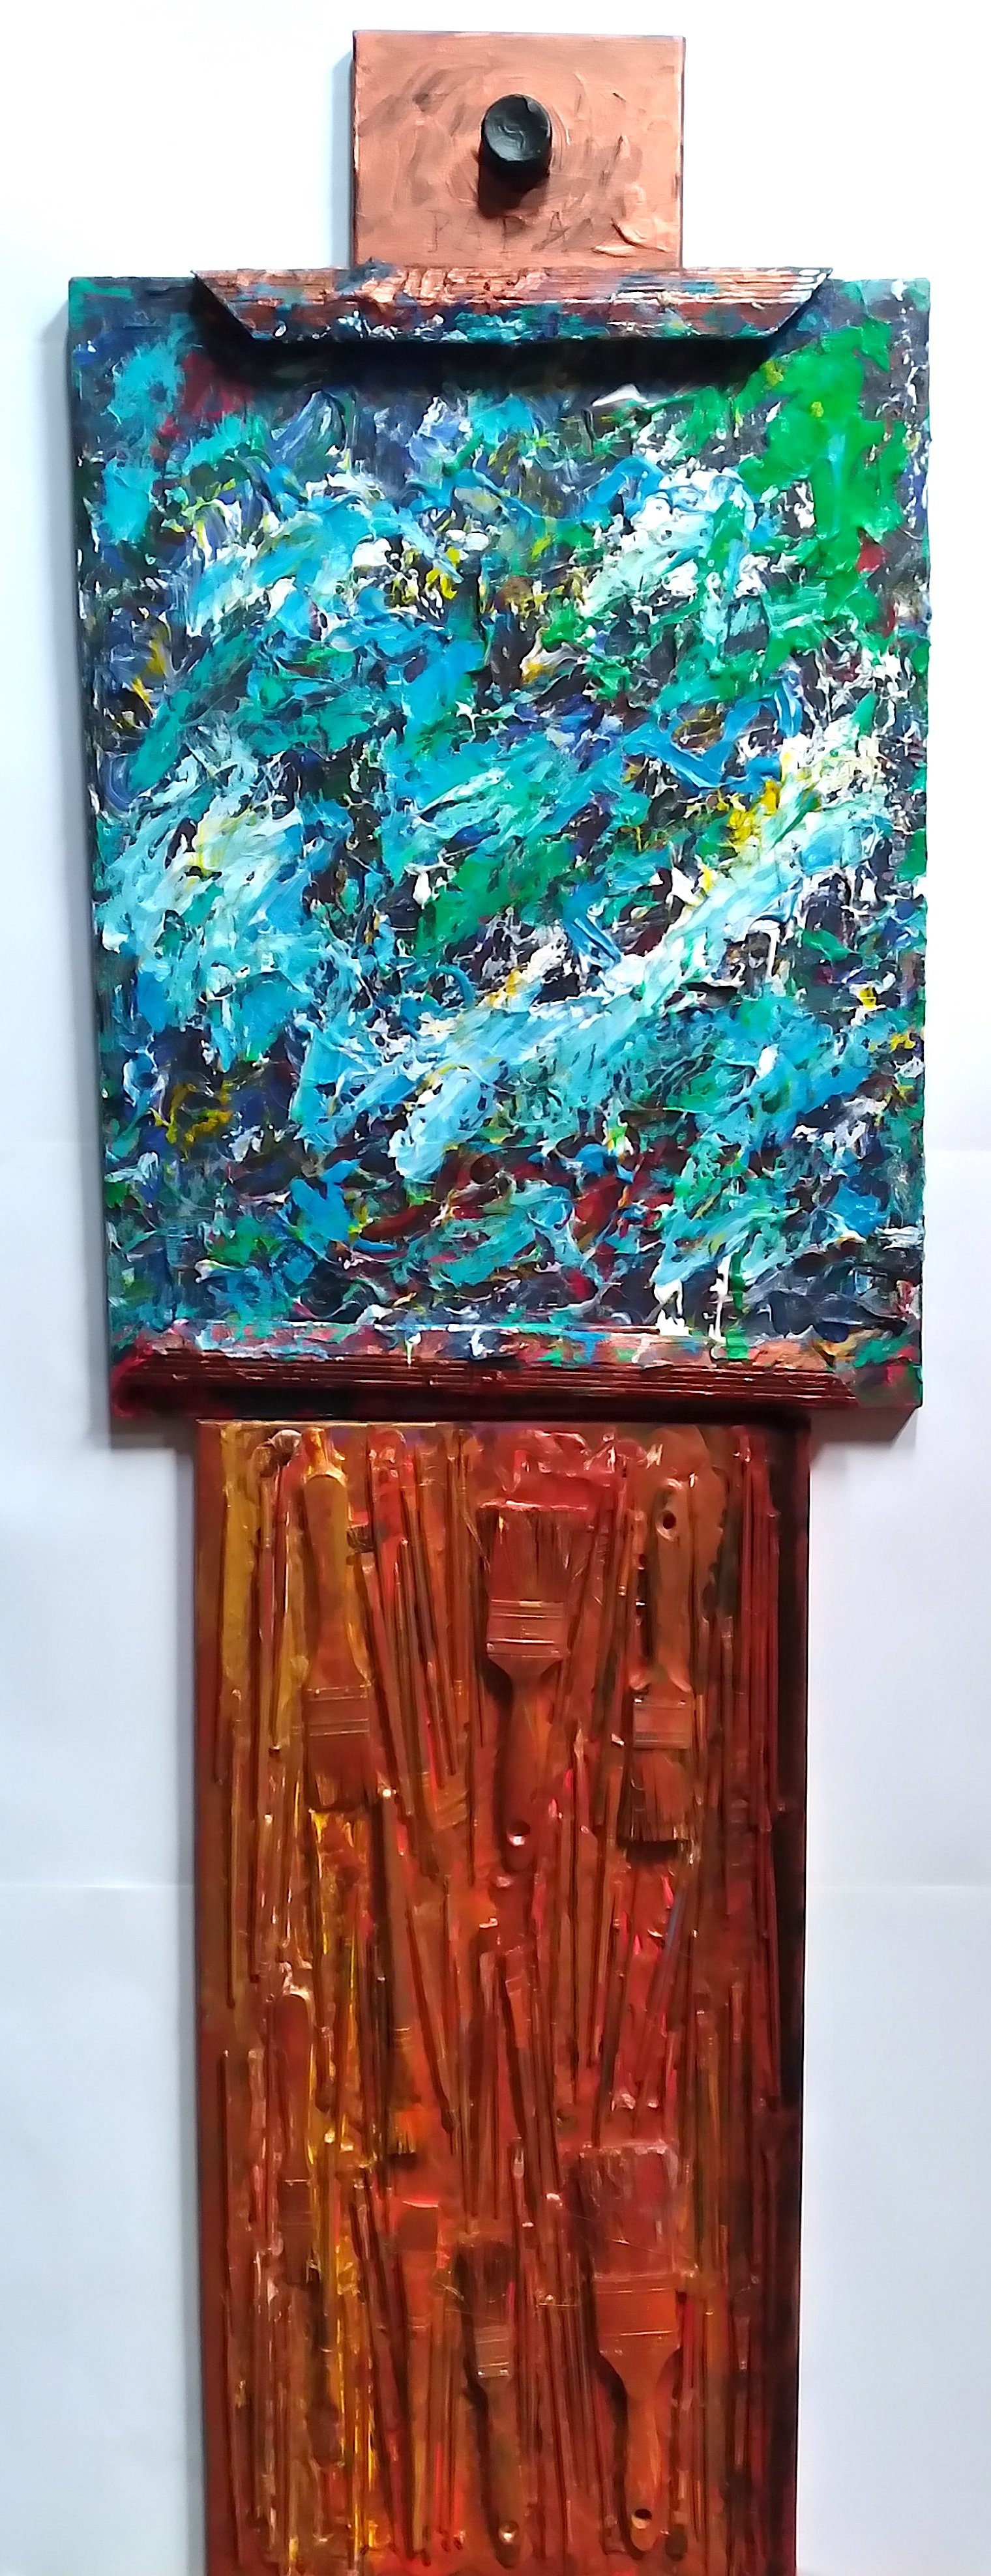 The Old Man and the Sea, 2009. Oil, acrylic, mixed media on canvas. 44" x 18”.